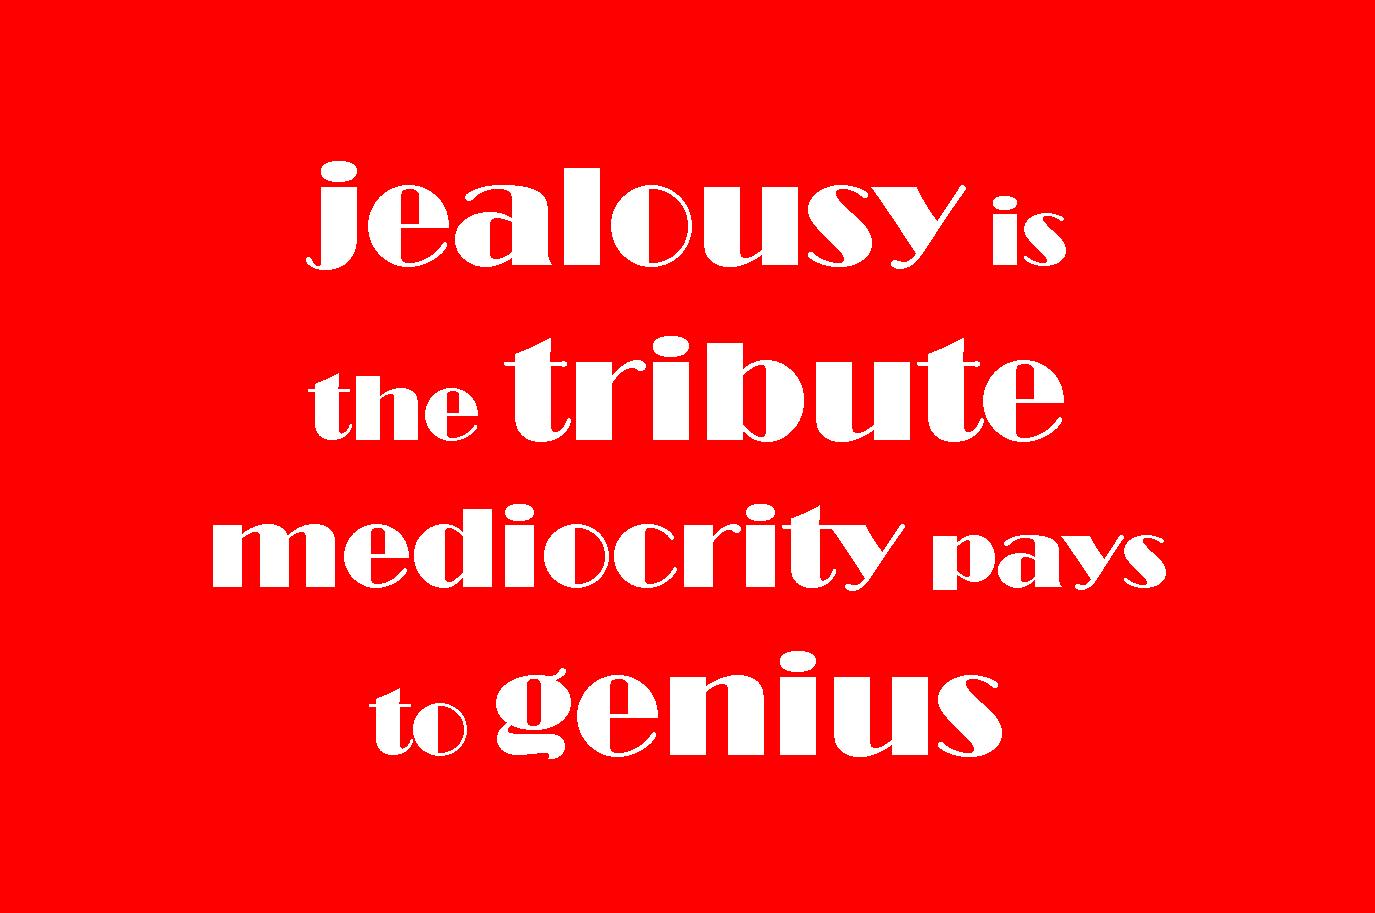 Jealousy is the tribute mediocrity pays to genius